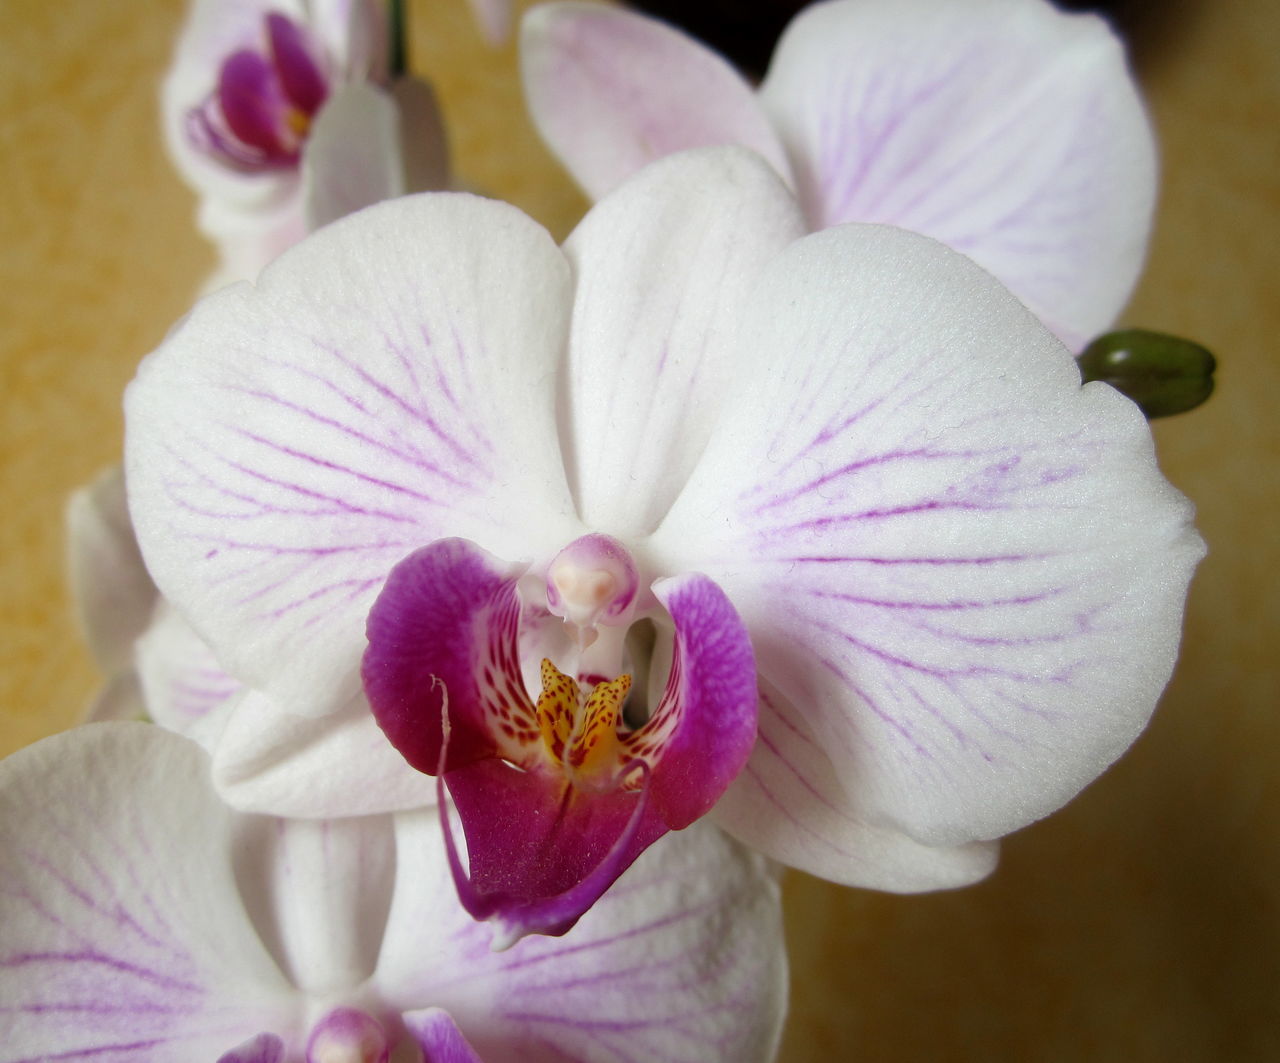 flower, flowering plant, freshness, plant, orchid, beauty in nature, petal, fragility, close-up, pink, flower head, inflorescence, human eye, christmas orchid, purple, macro photography, pollen, nature, growth, focus on foreground, stamen, blossom, white, outdoors, selective focus